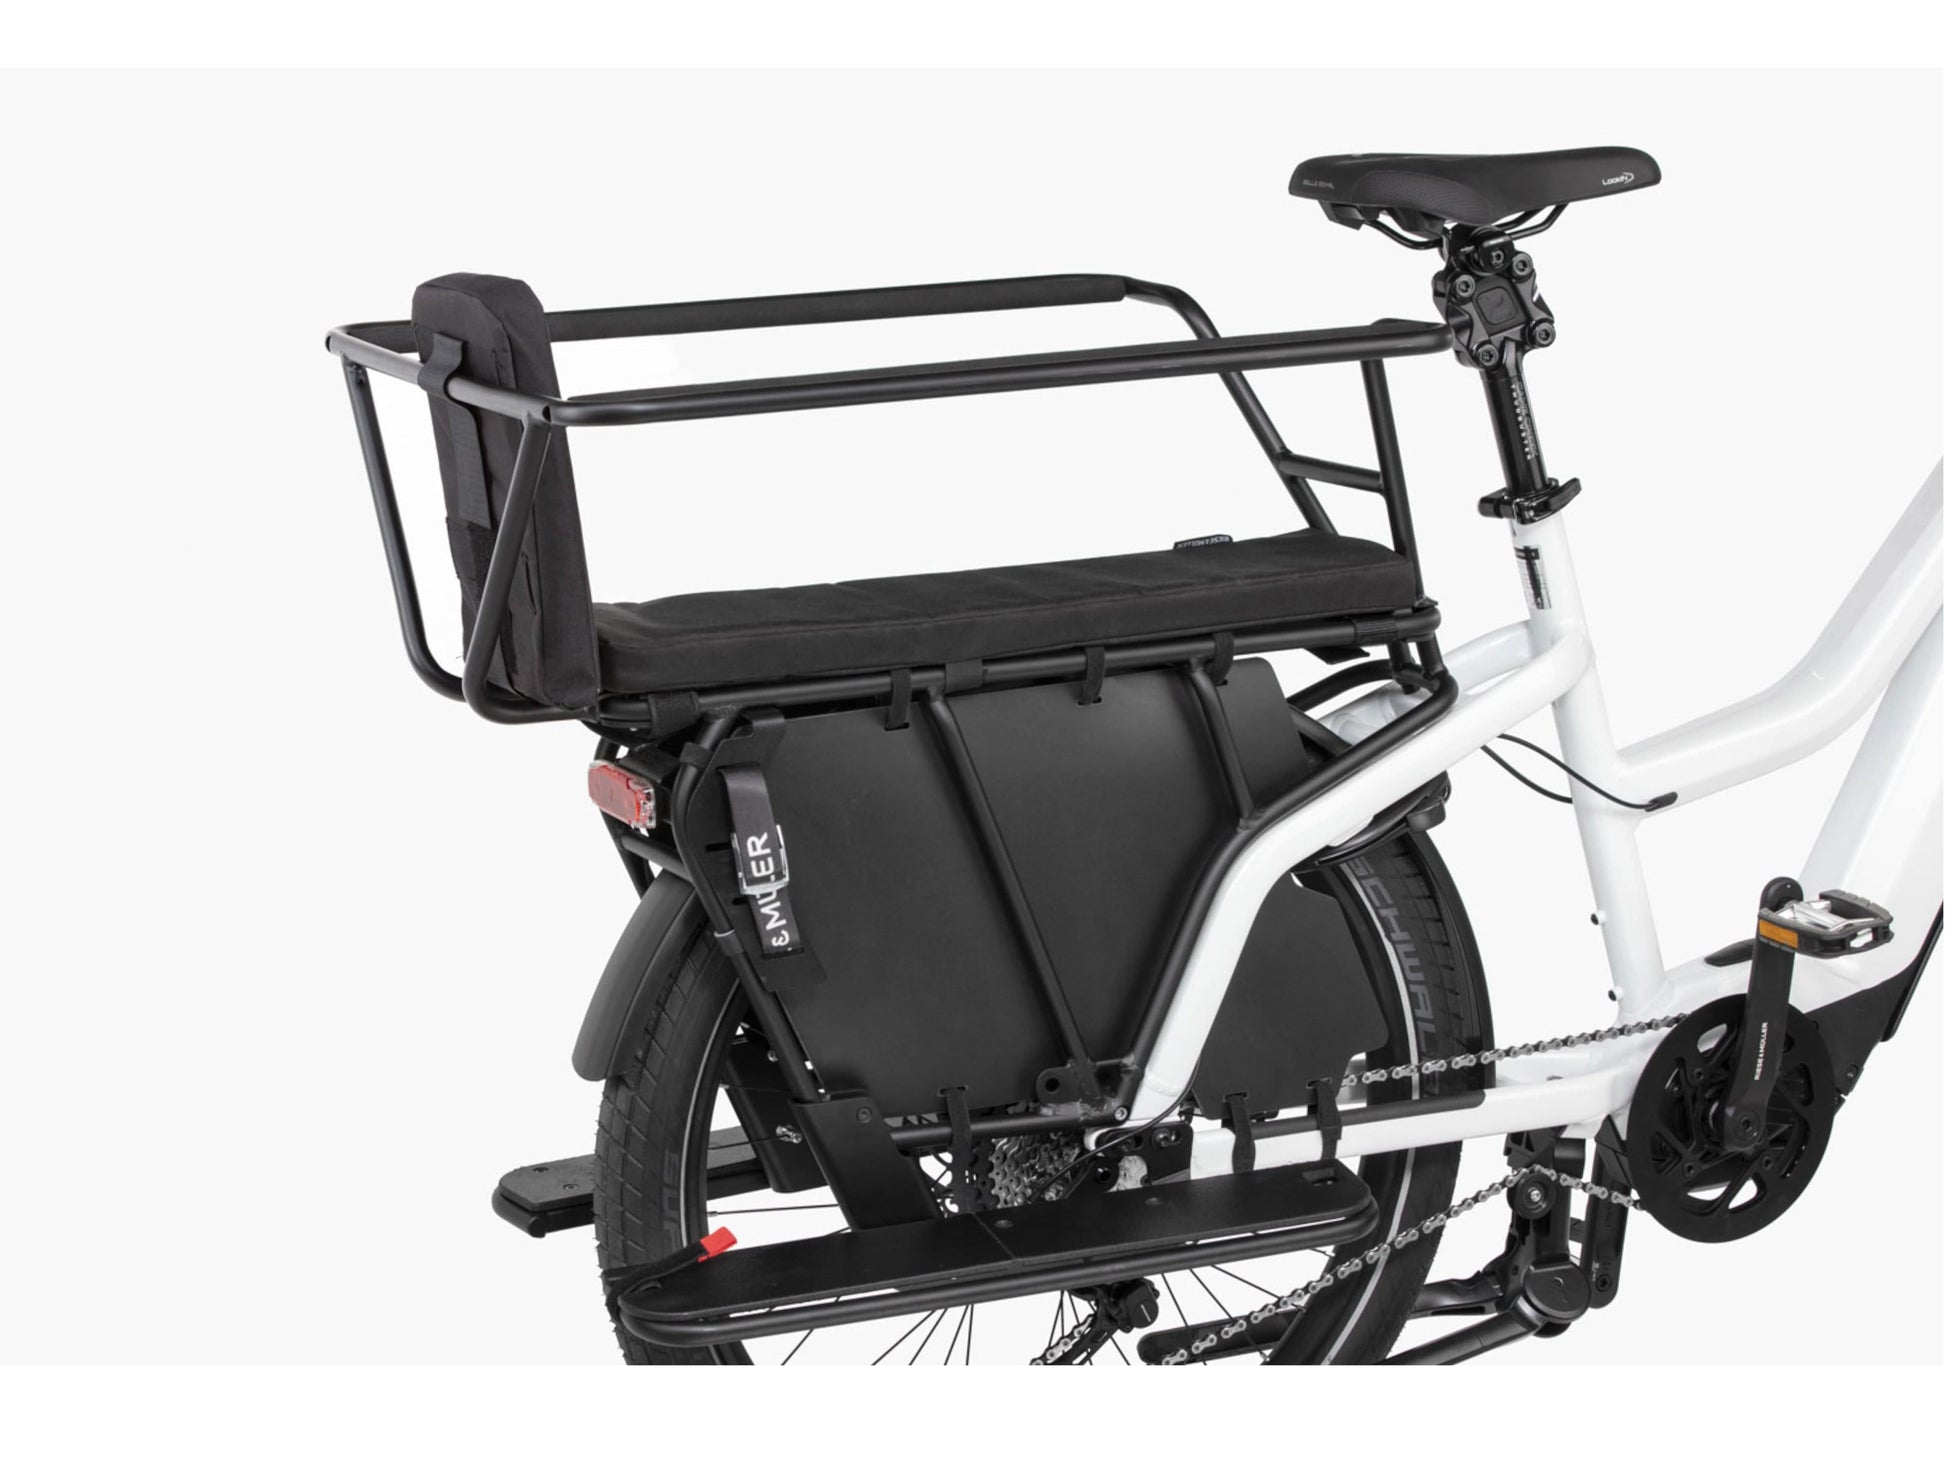 Riese and Muller Multicharger Mixte GT Touring HS emtb hardtail closeup rear carrier passenger safety kit option